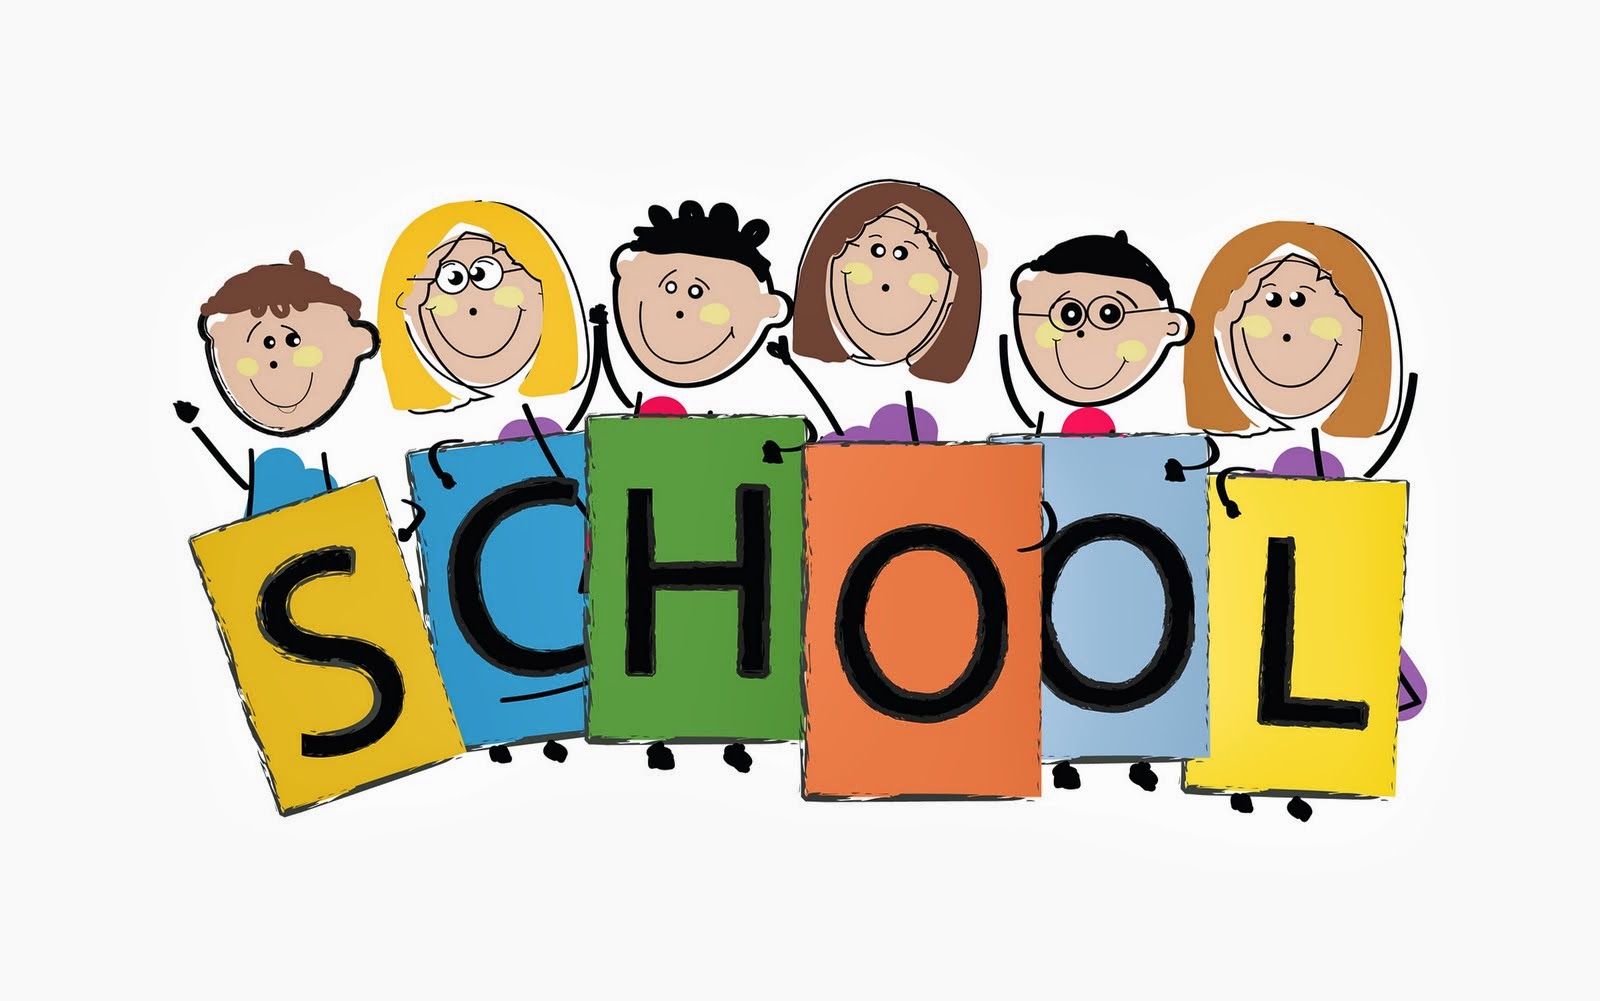 Free School Assembly Cliparts, Download Free Clip Art ...
 Elementary School Assembly Clipart